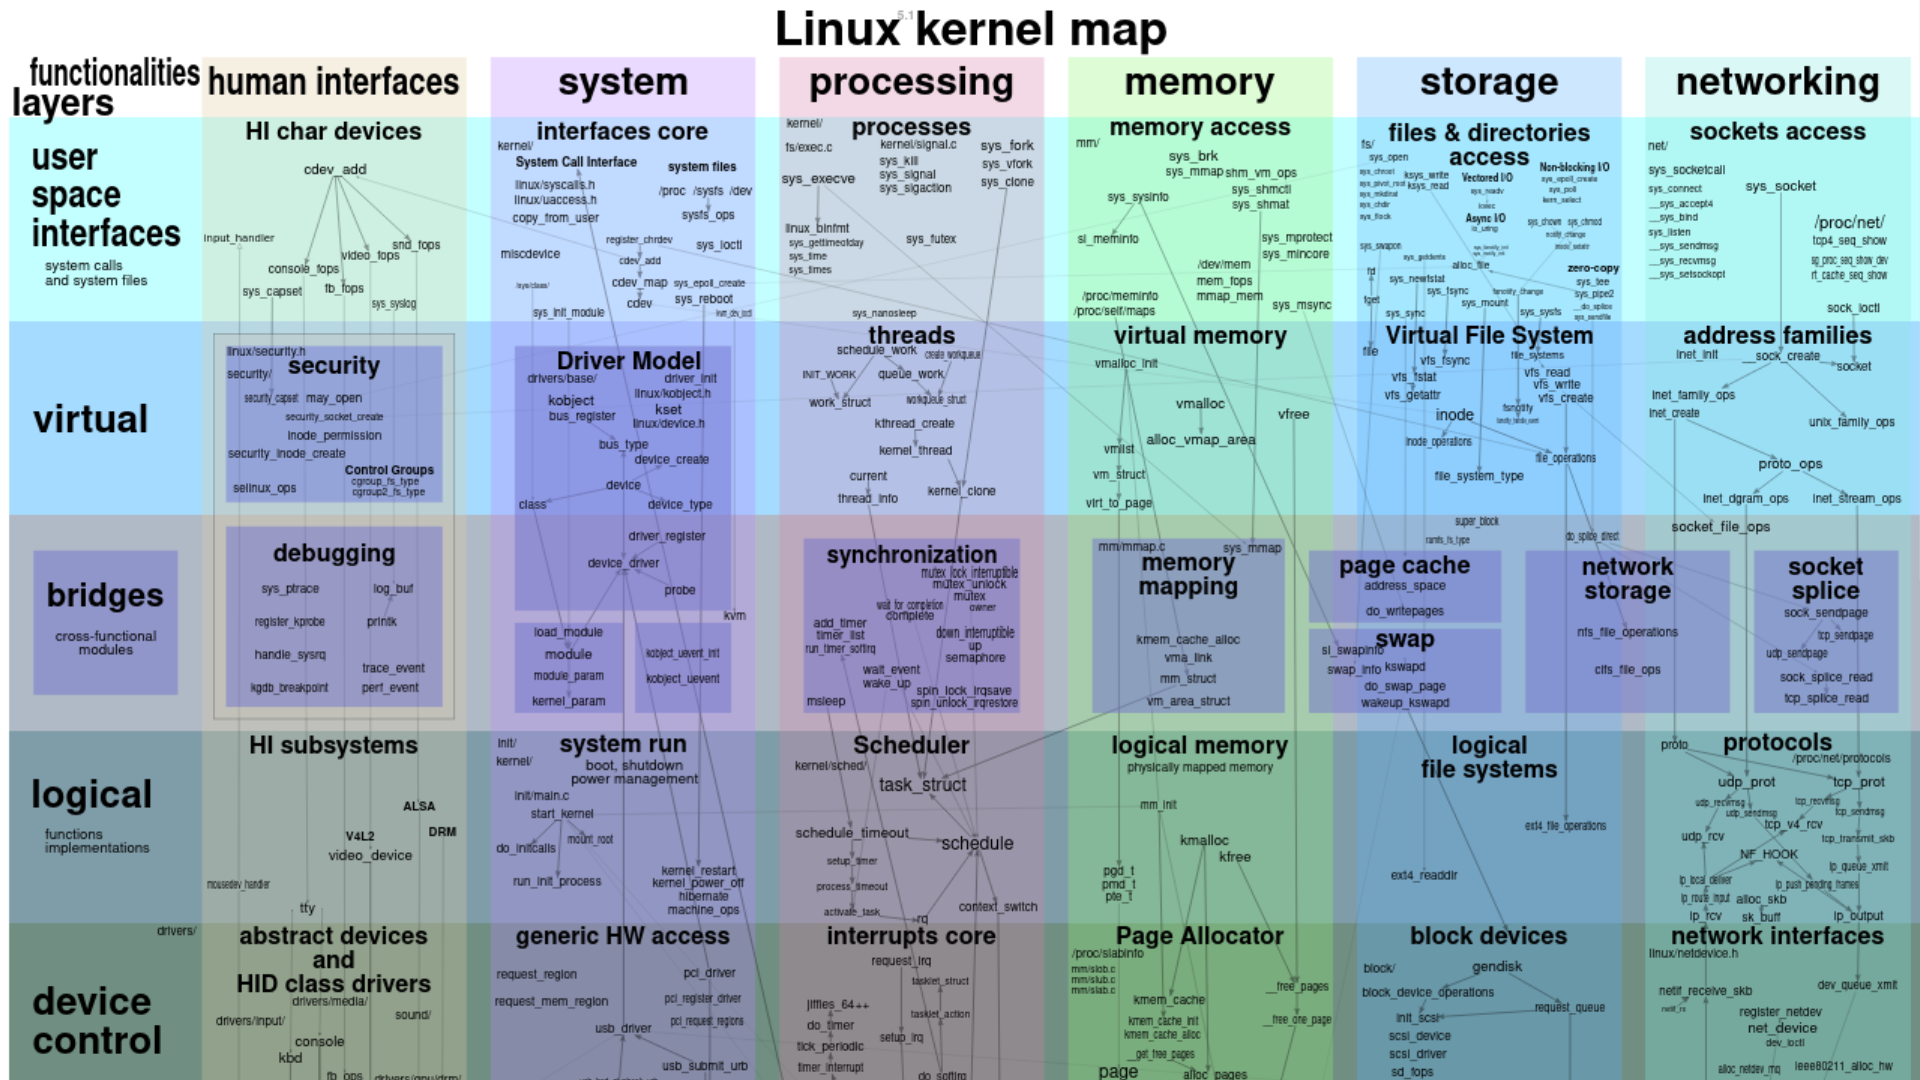 Linux has become one of the largest operating systems on the servers that run large websites, and hopefully, one day, it will be big in the desktop ma